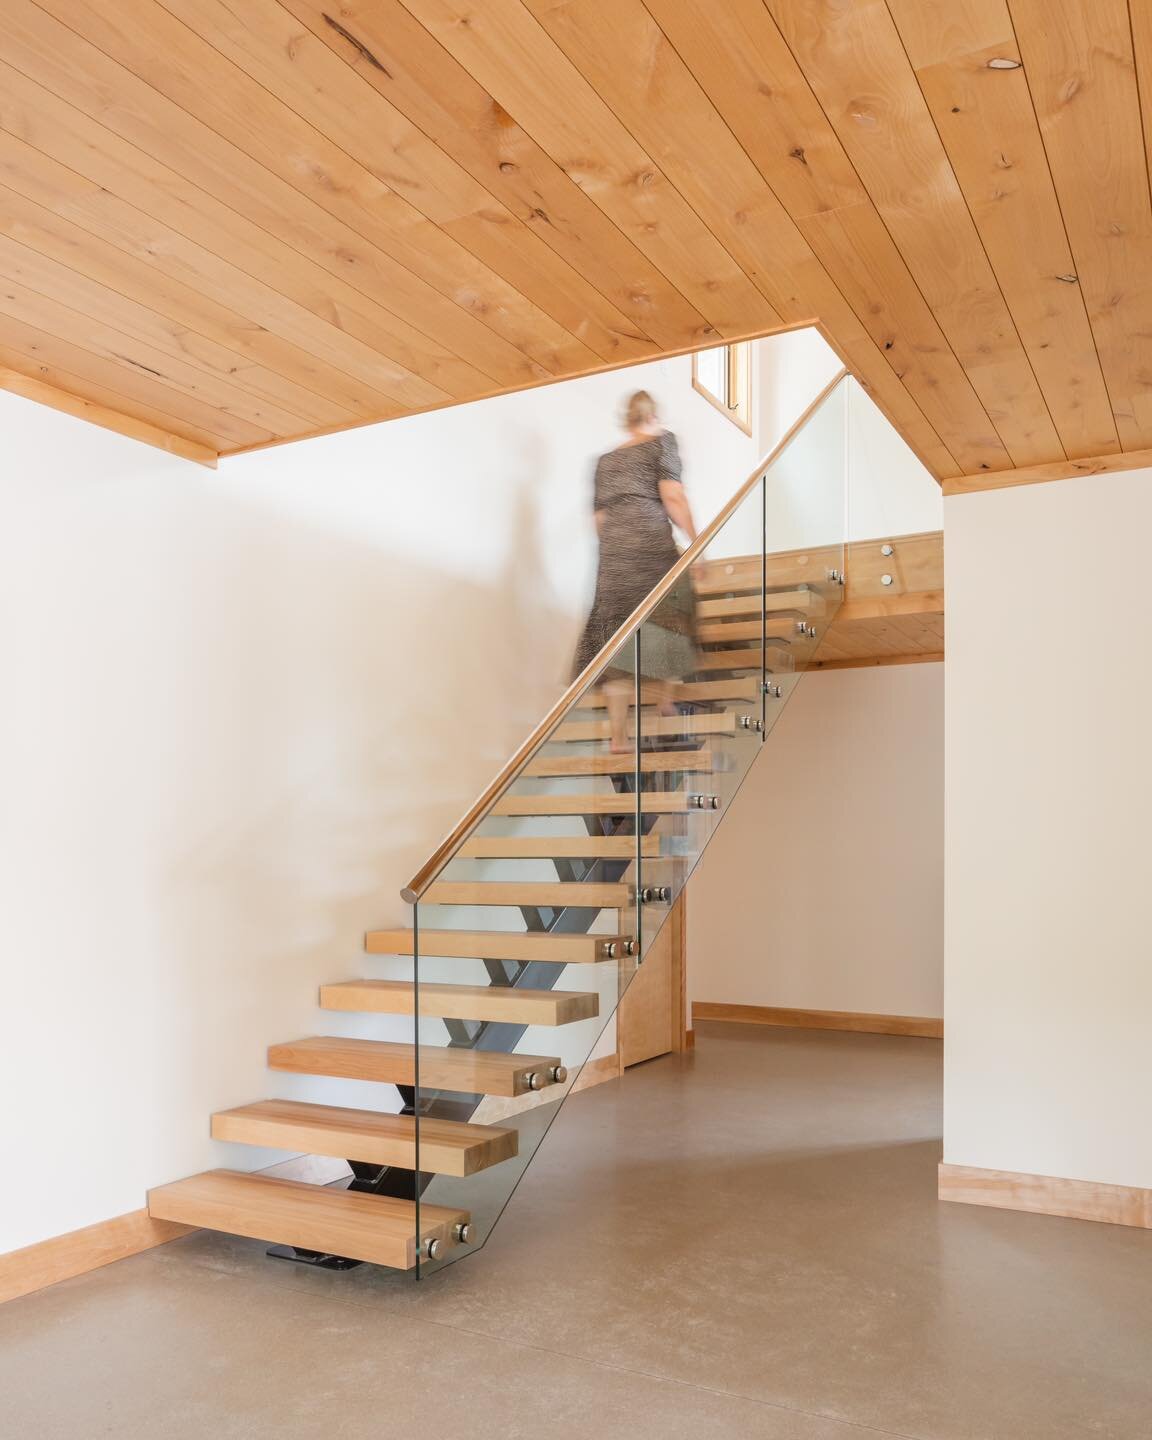 The treads on this spine staircase almost appear to be floating for a very minimal, airy feel.  #modern #traversecity #tcarchitect #minimalist #lessismore